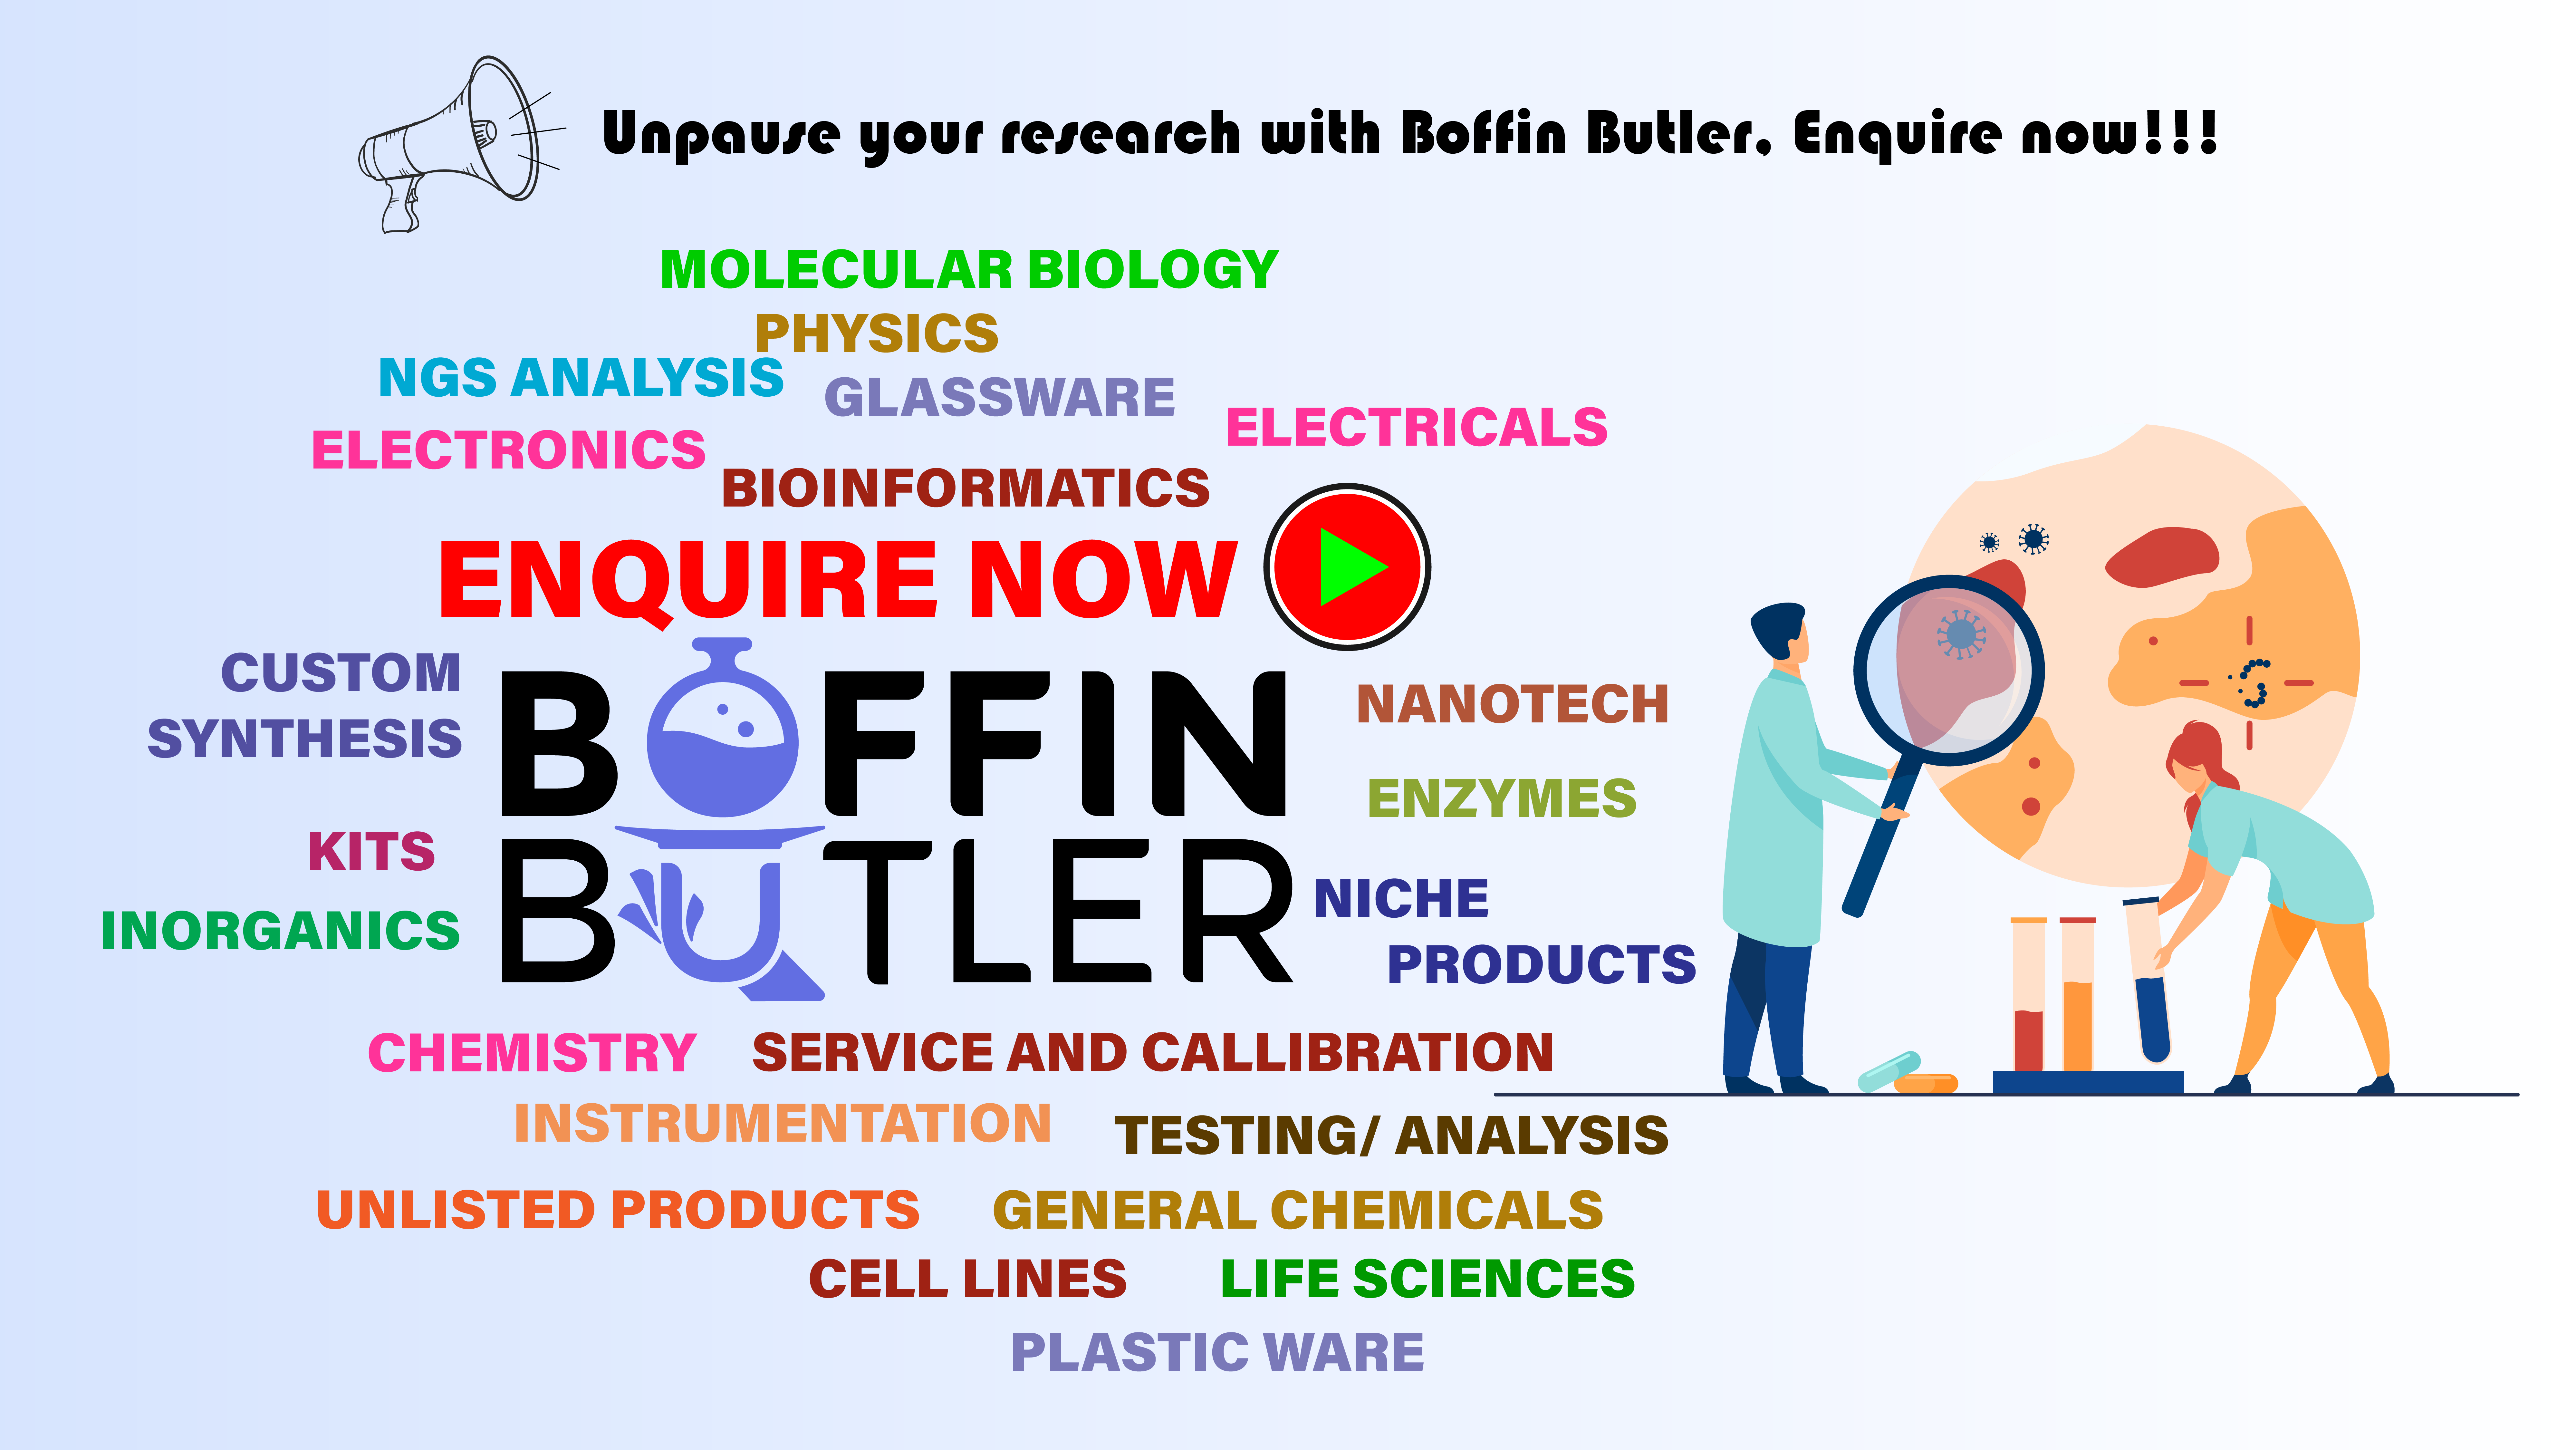 Unpause your research with BOFFIN BUTLER, Enquire Now !!!